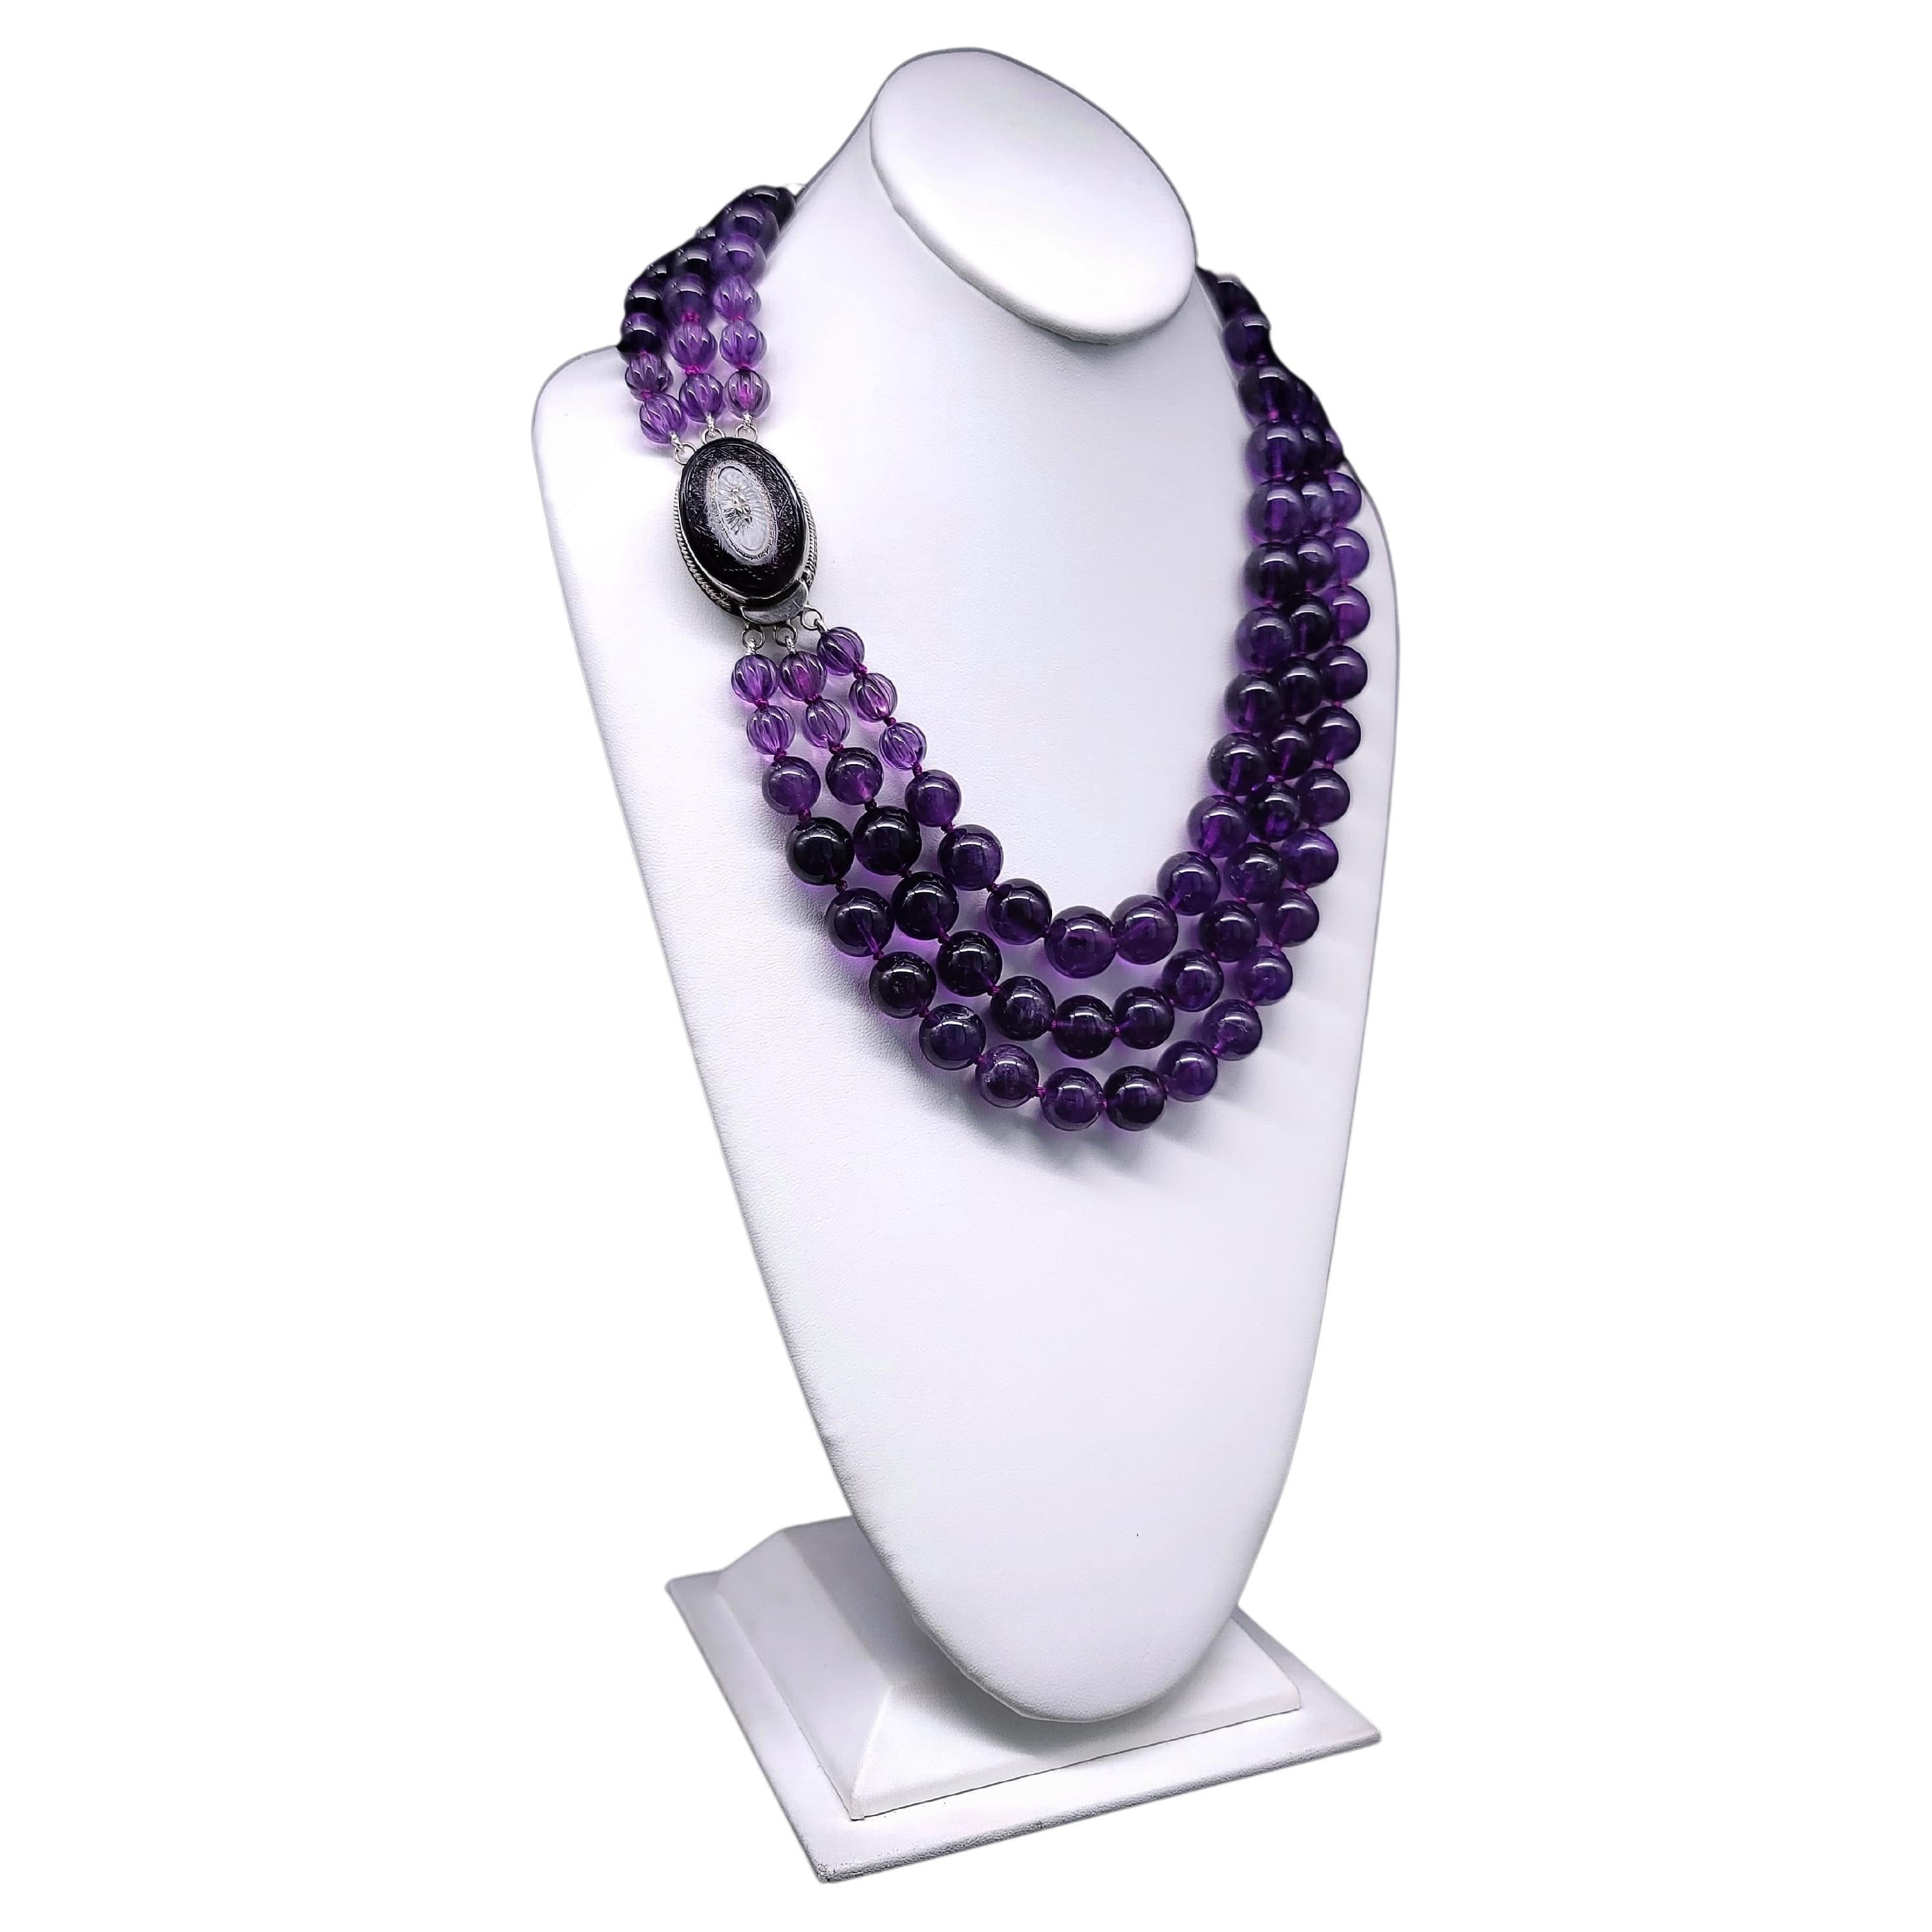 One-of-a-Kind

Behold, an extraordinary Amethyst necklace that possesses an eloquence of its own. This remarkable creation features the mightiest of crystals, presented in a harmonious convergence of three strands, each adorned with resplendent 16mm